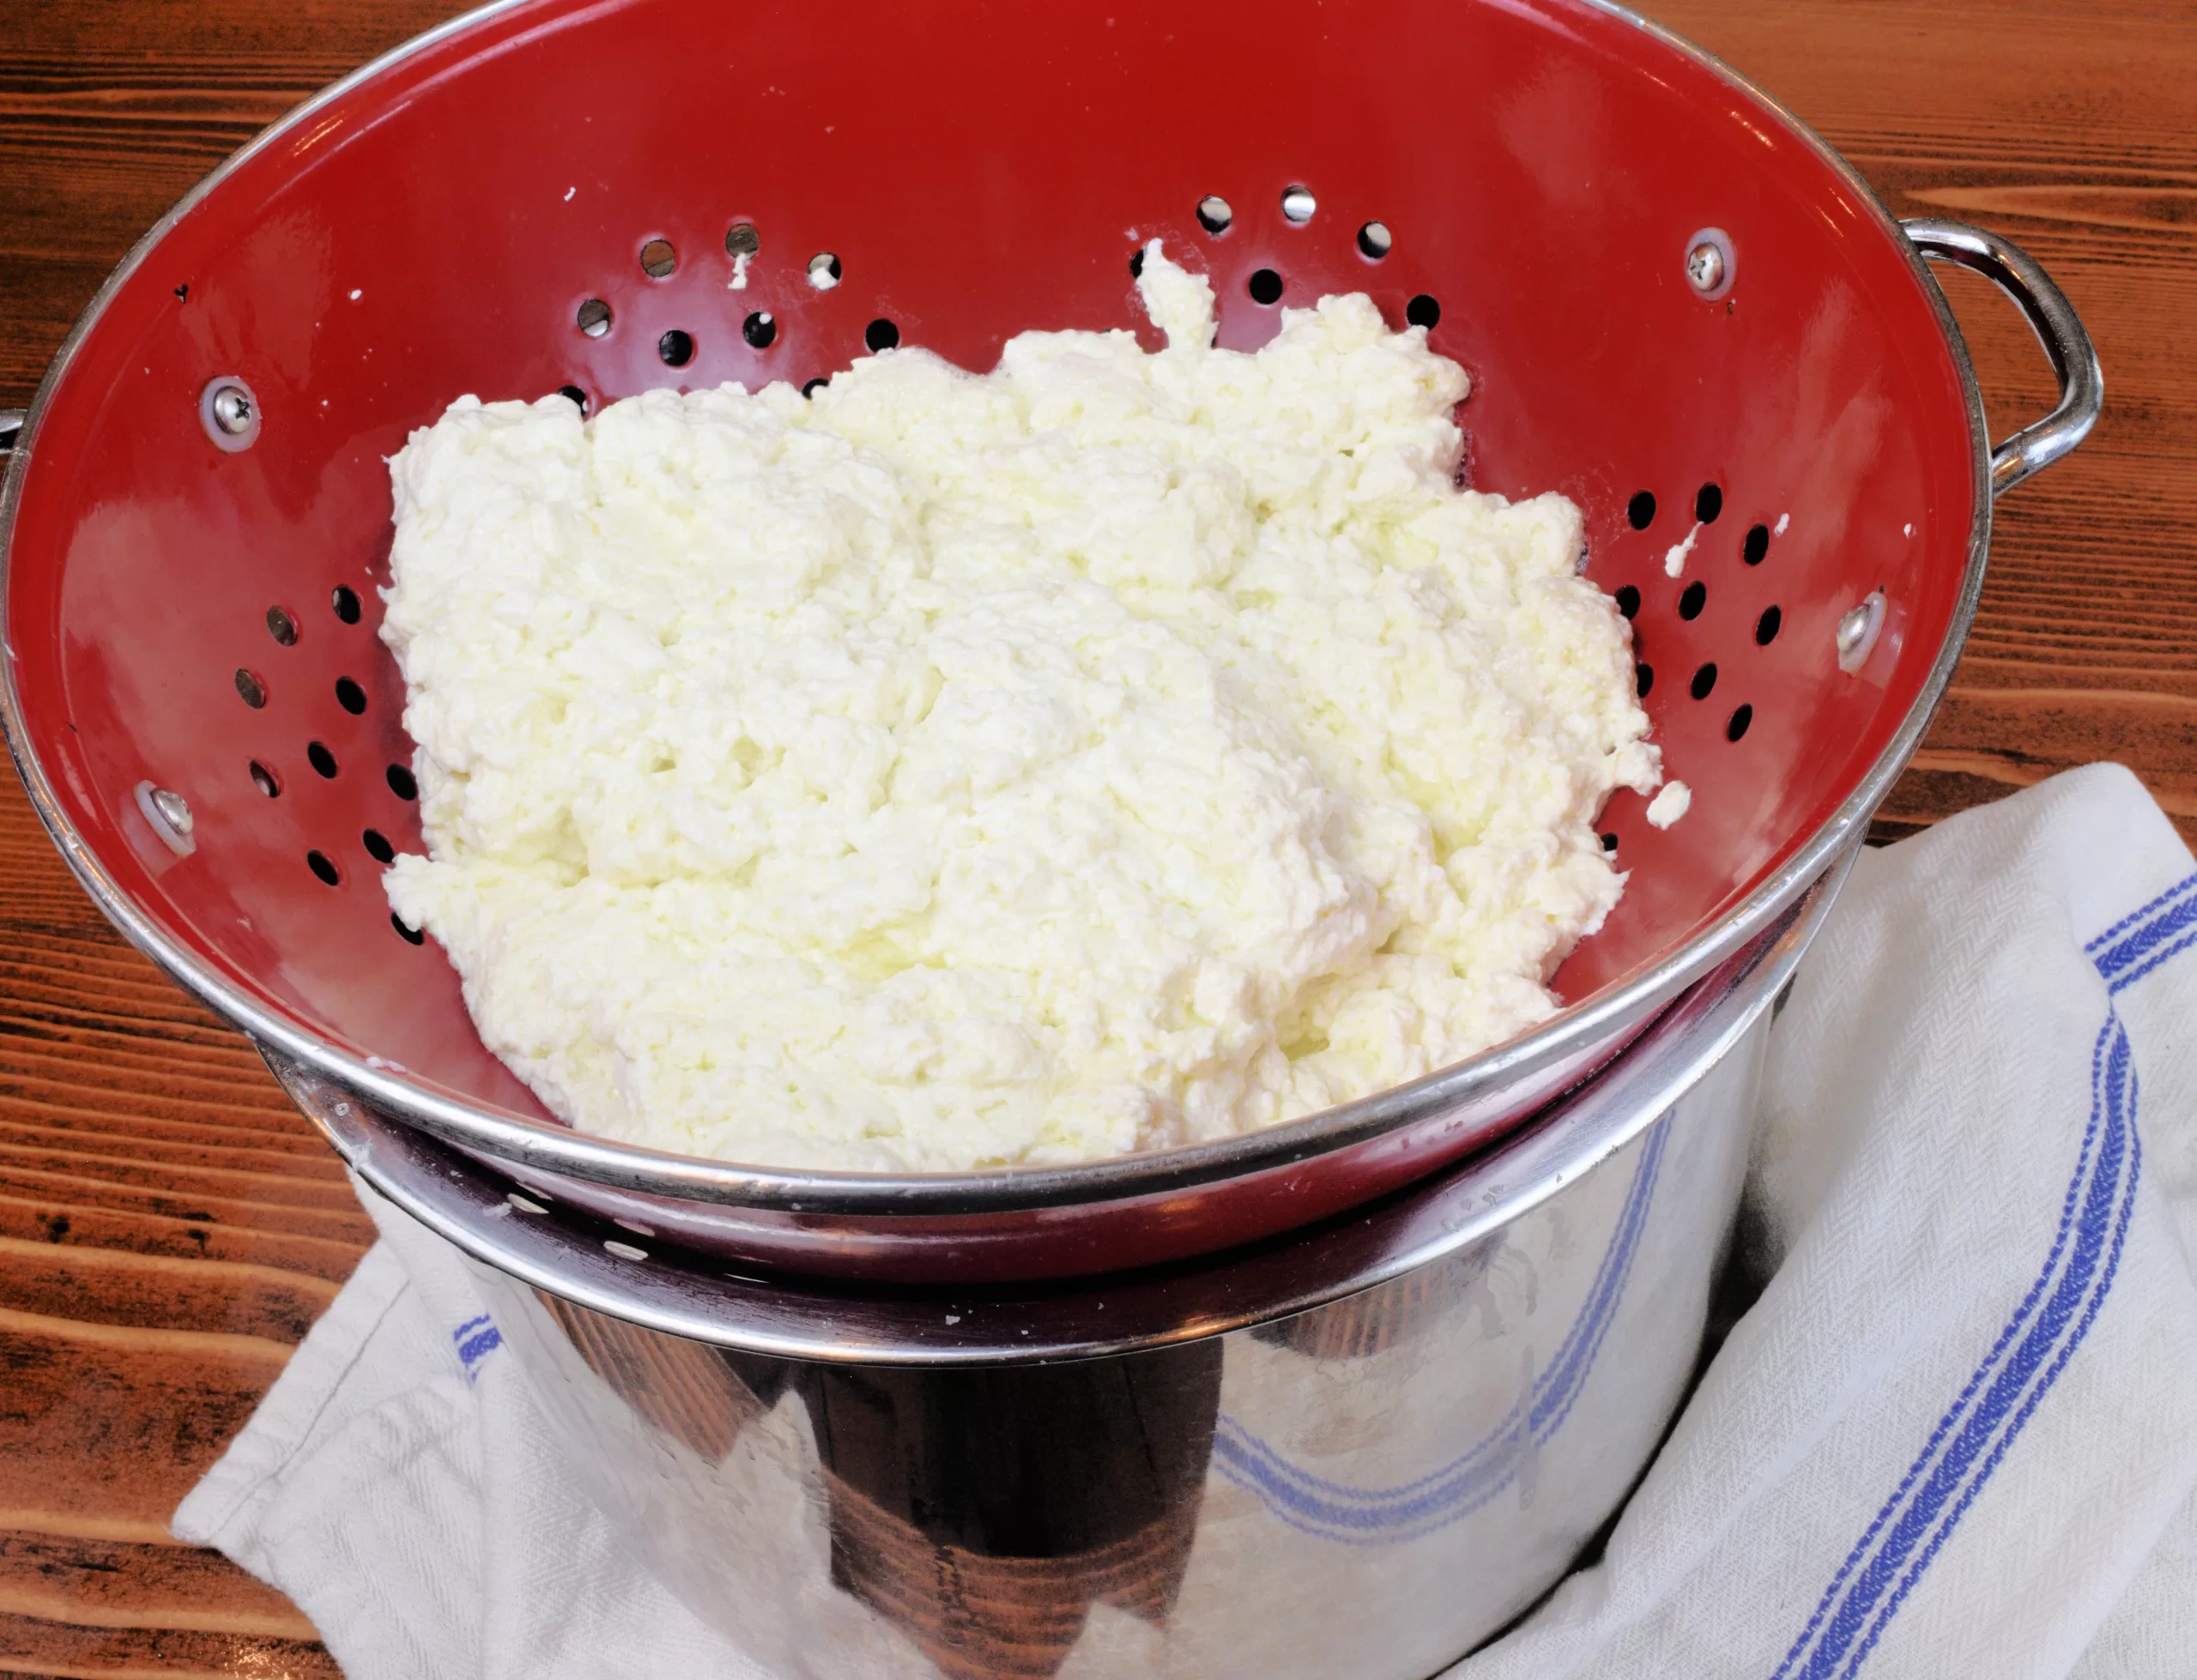 Homemade farmers cheese being strained in a red colander on a white tea towel.